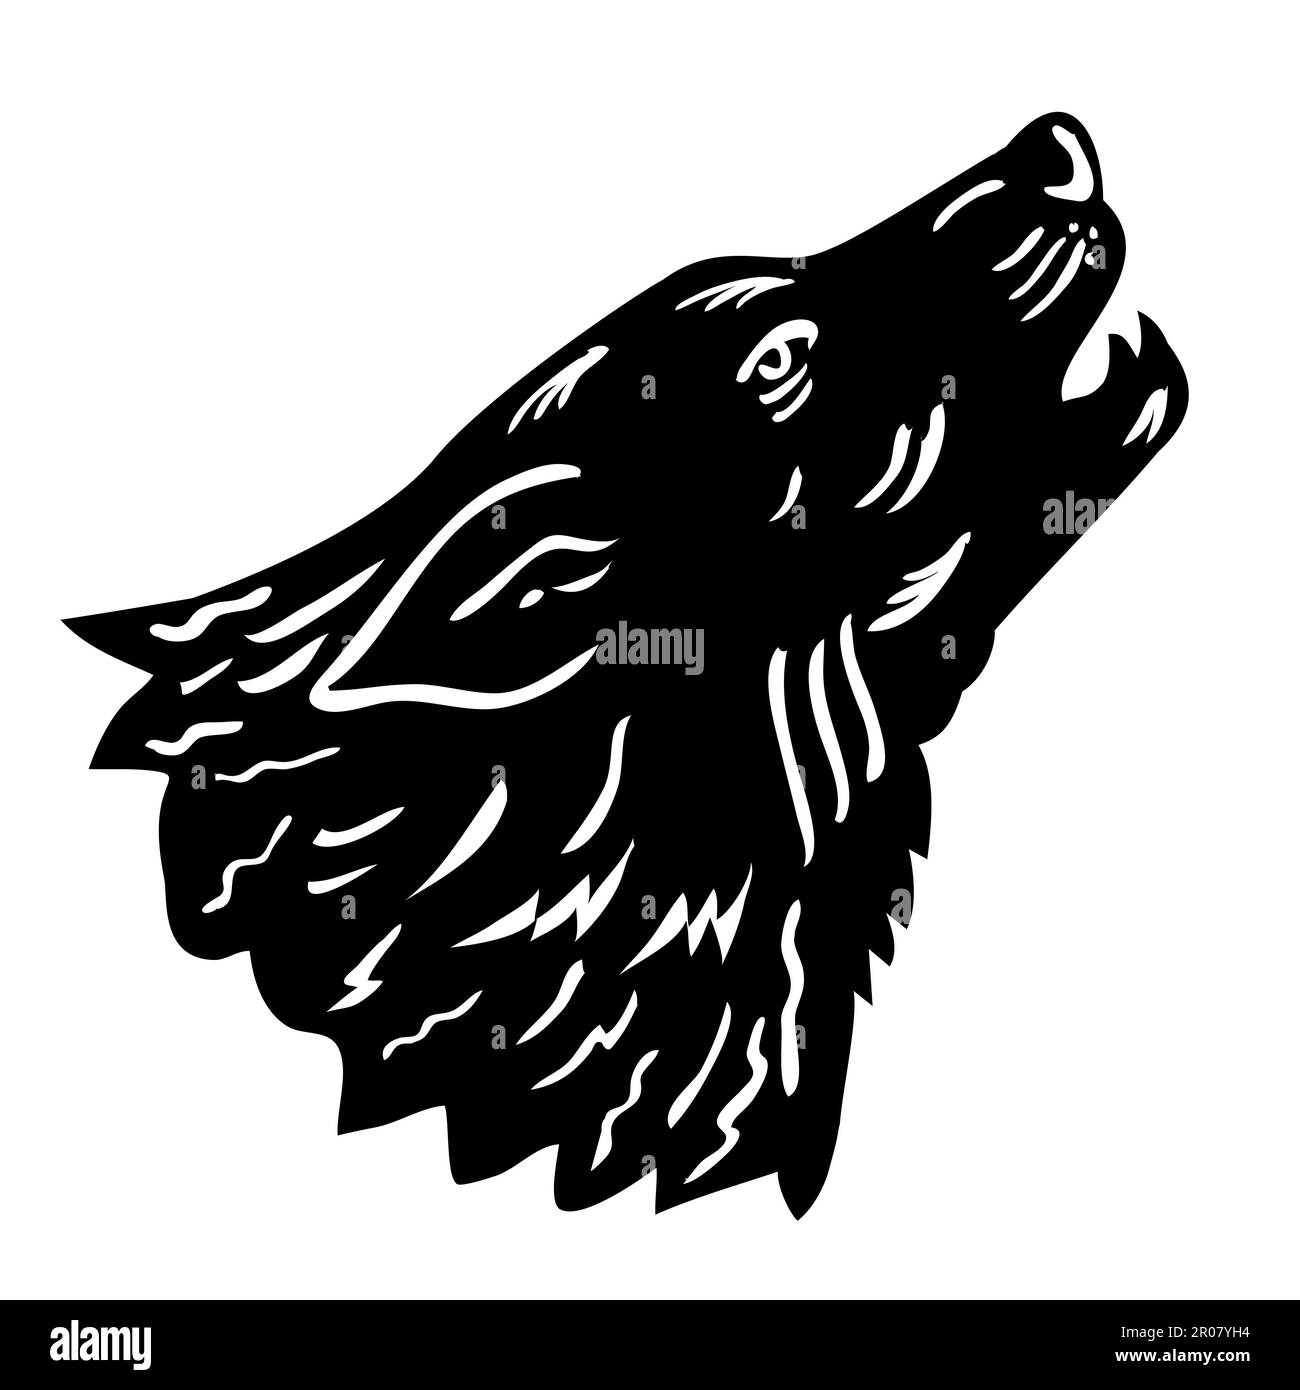 Illustration showing head of wolf or wild dog howling viewed from side done in retro woodcut black and white. Stock Photo